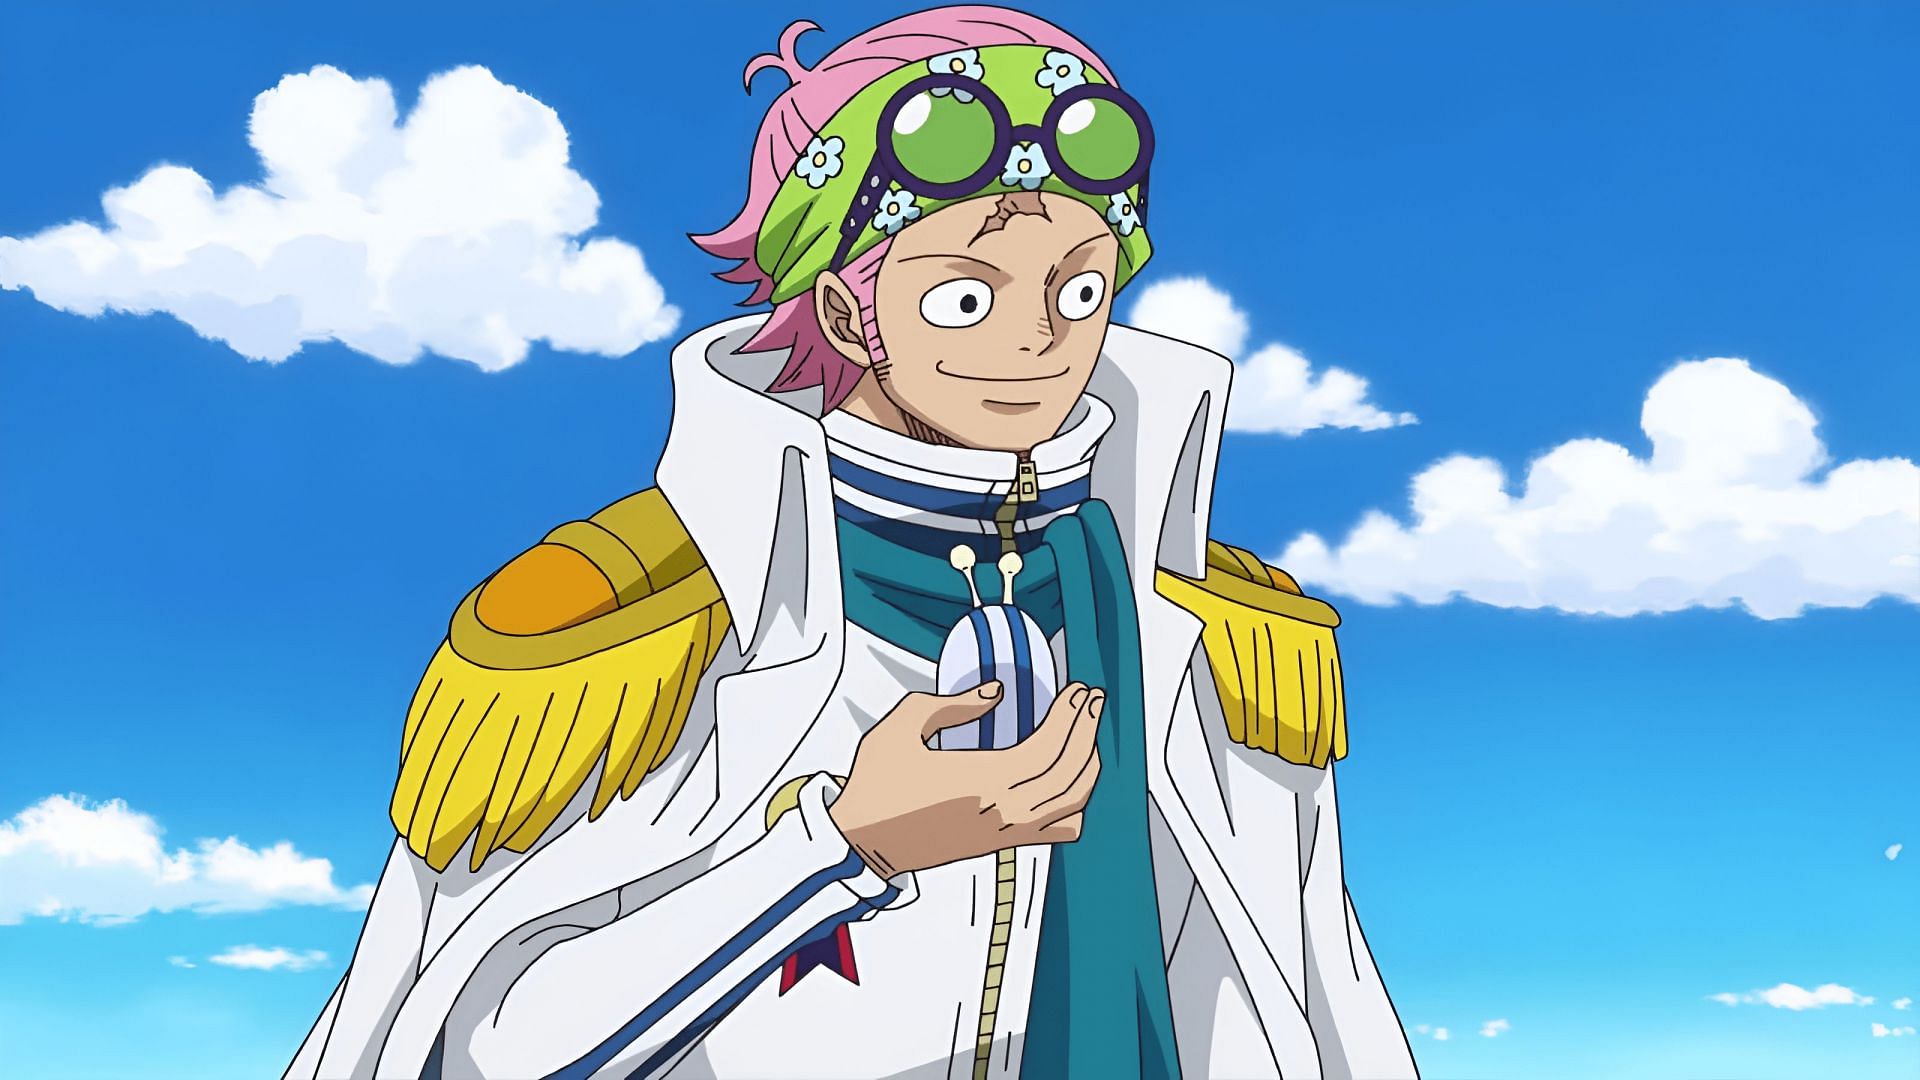 Koby as seen in One Piece (Image via Toei Animation)